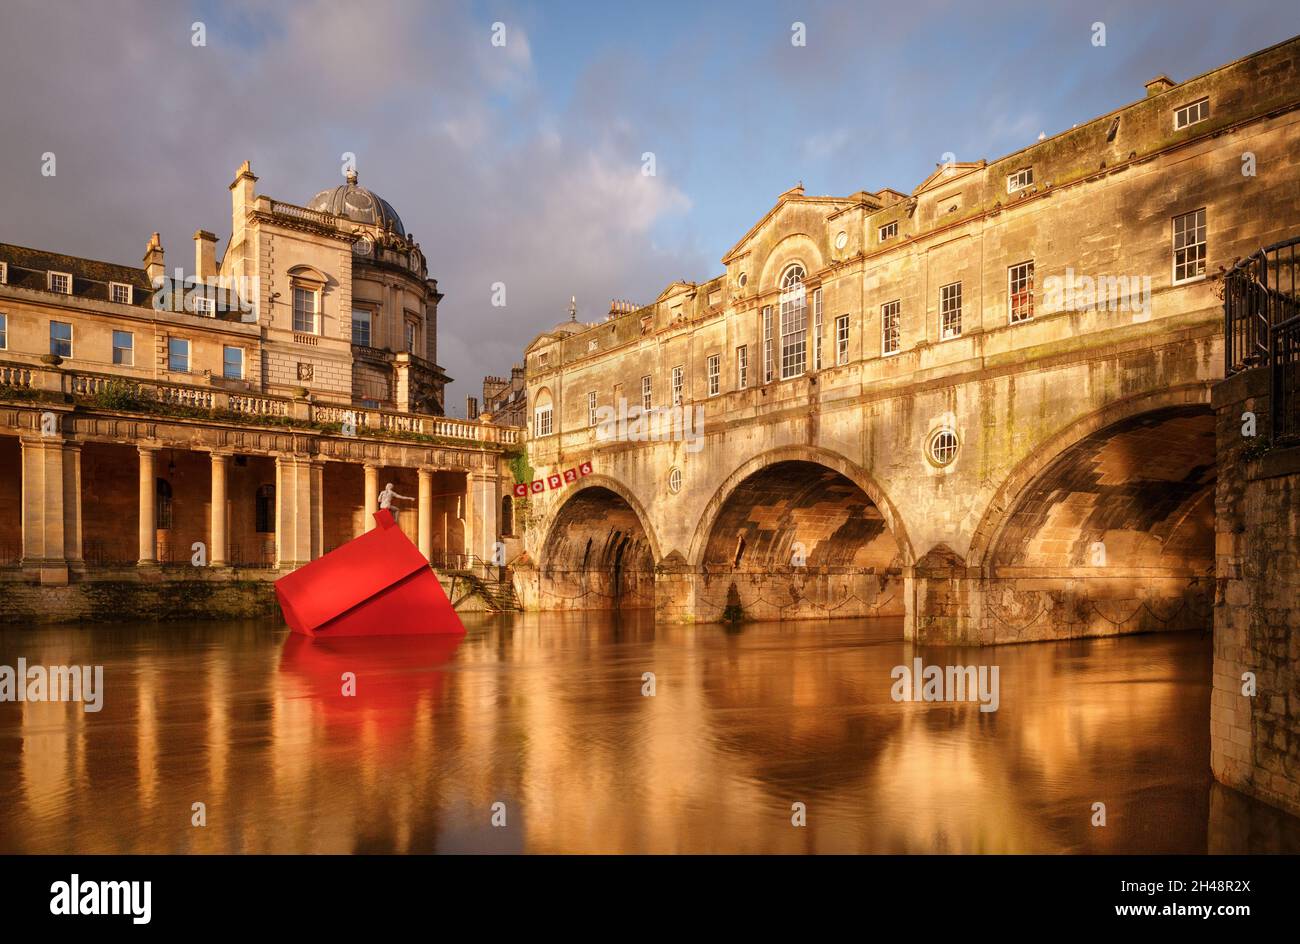 Pulteney Bridge, Bath, 1st November 2021.   At the break of dawn in Bath the sun illuminates Pulteney Bridge and the Cop 26 'The Sinking House' installation designed in collaboration with Stride Treglown, Format Engineers, Fifield Moss Carpentry and artist Anna Gillespie. It is also dawn at the United Nations Climate Change Conference where World leaders are set to address issues of an increased threat in the heightening global climate crisis. 'The Sinking House' represents a message of warning about and hope.  Credit: Casper Farrell/Alamy News Stock Photo